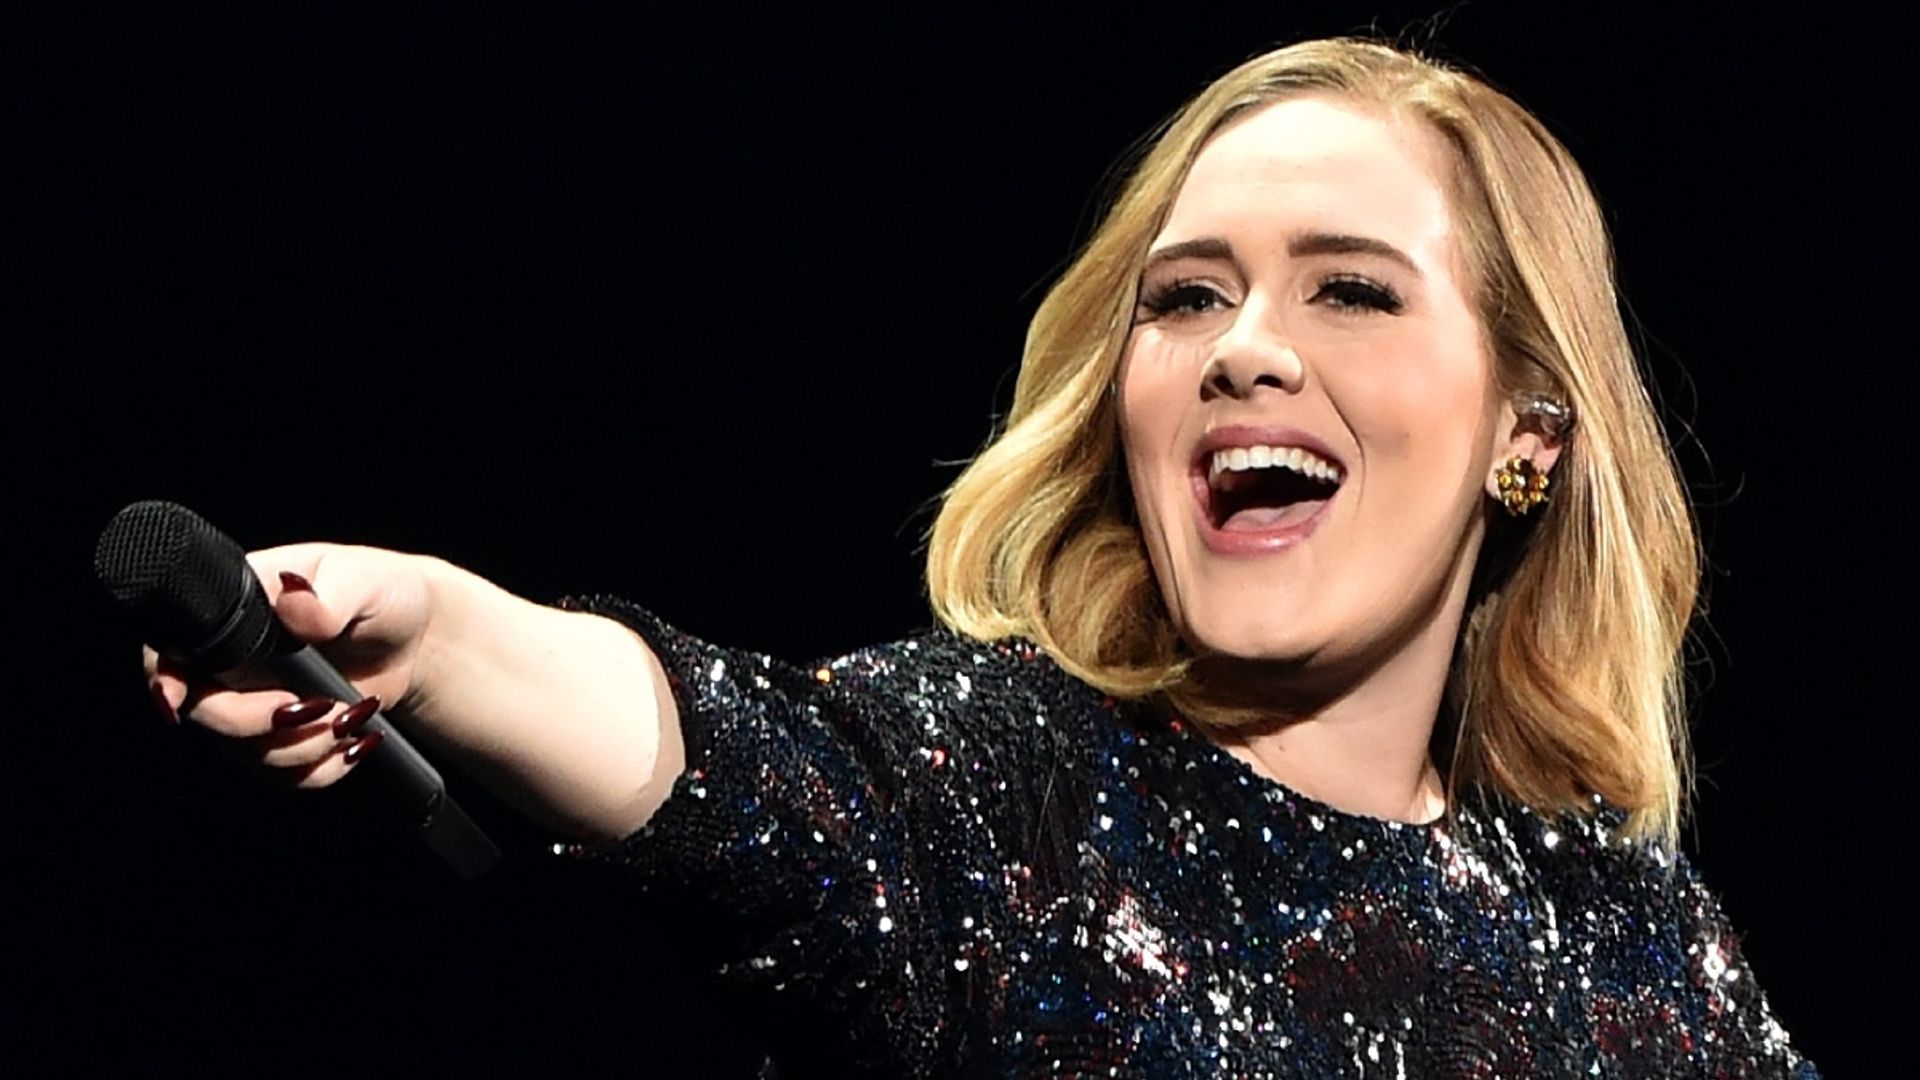 Adele surprises fans with music video announcement in show-stopping new look